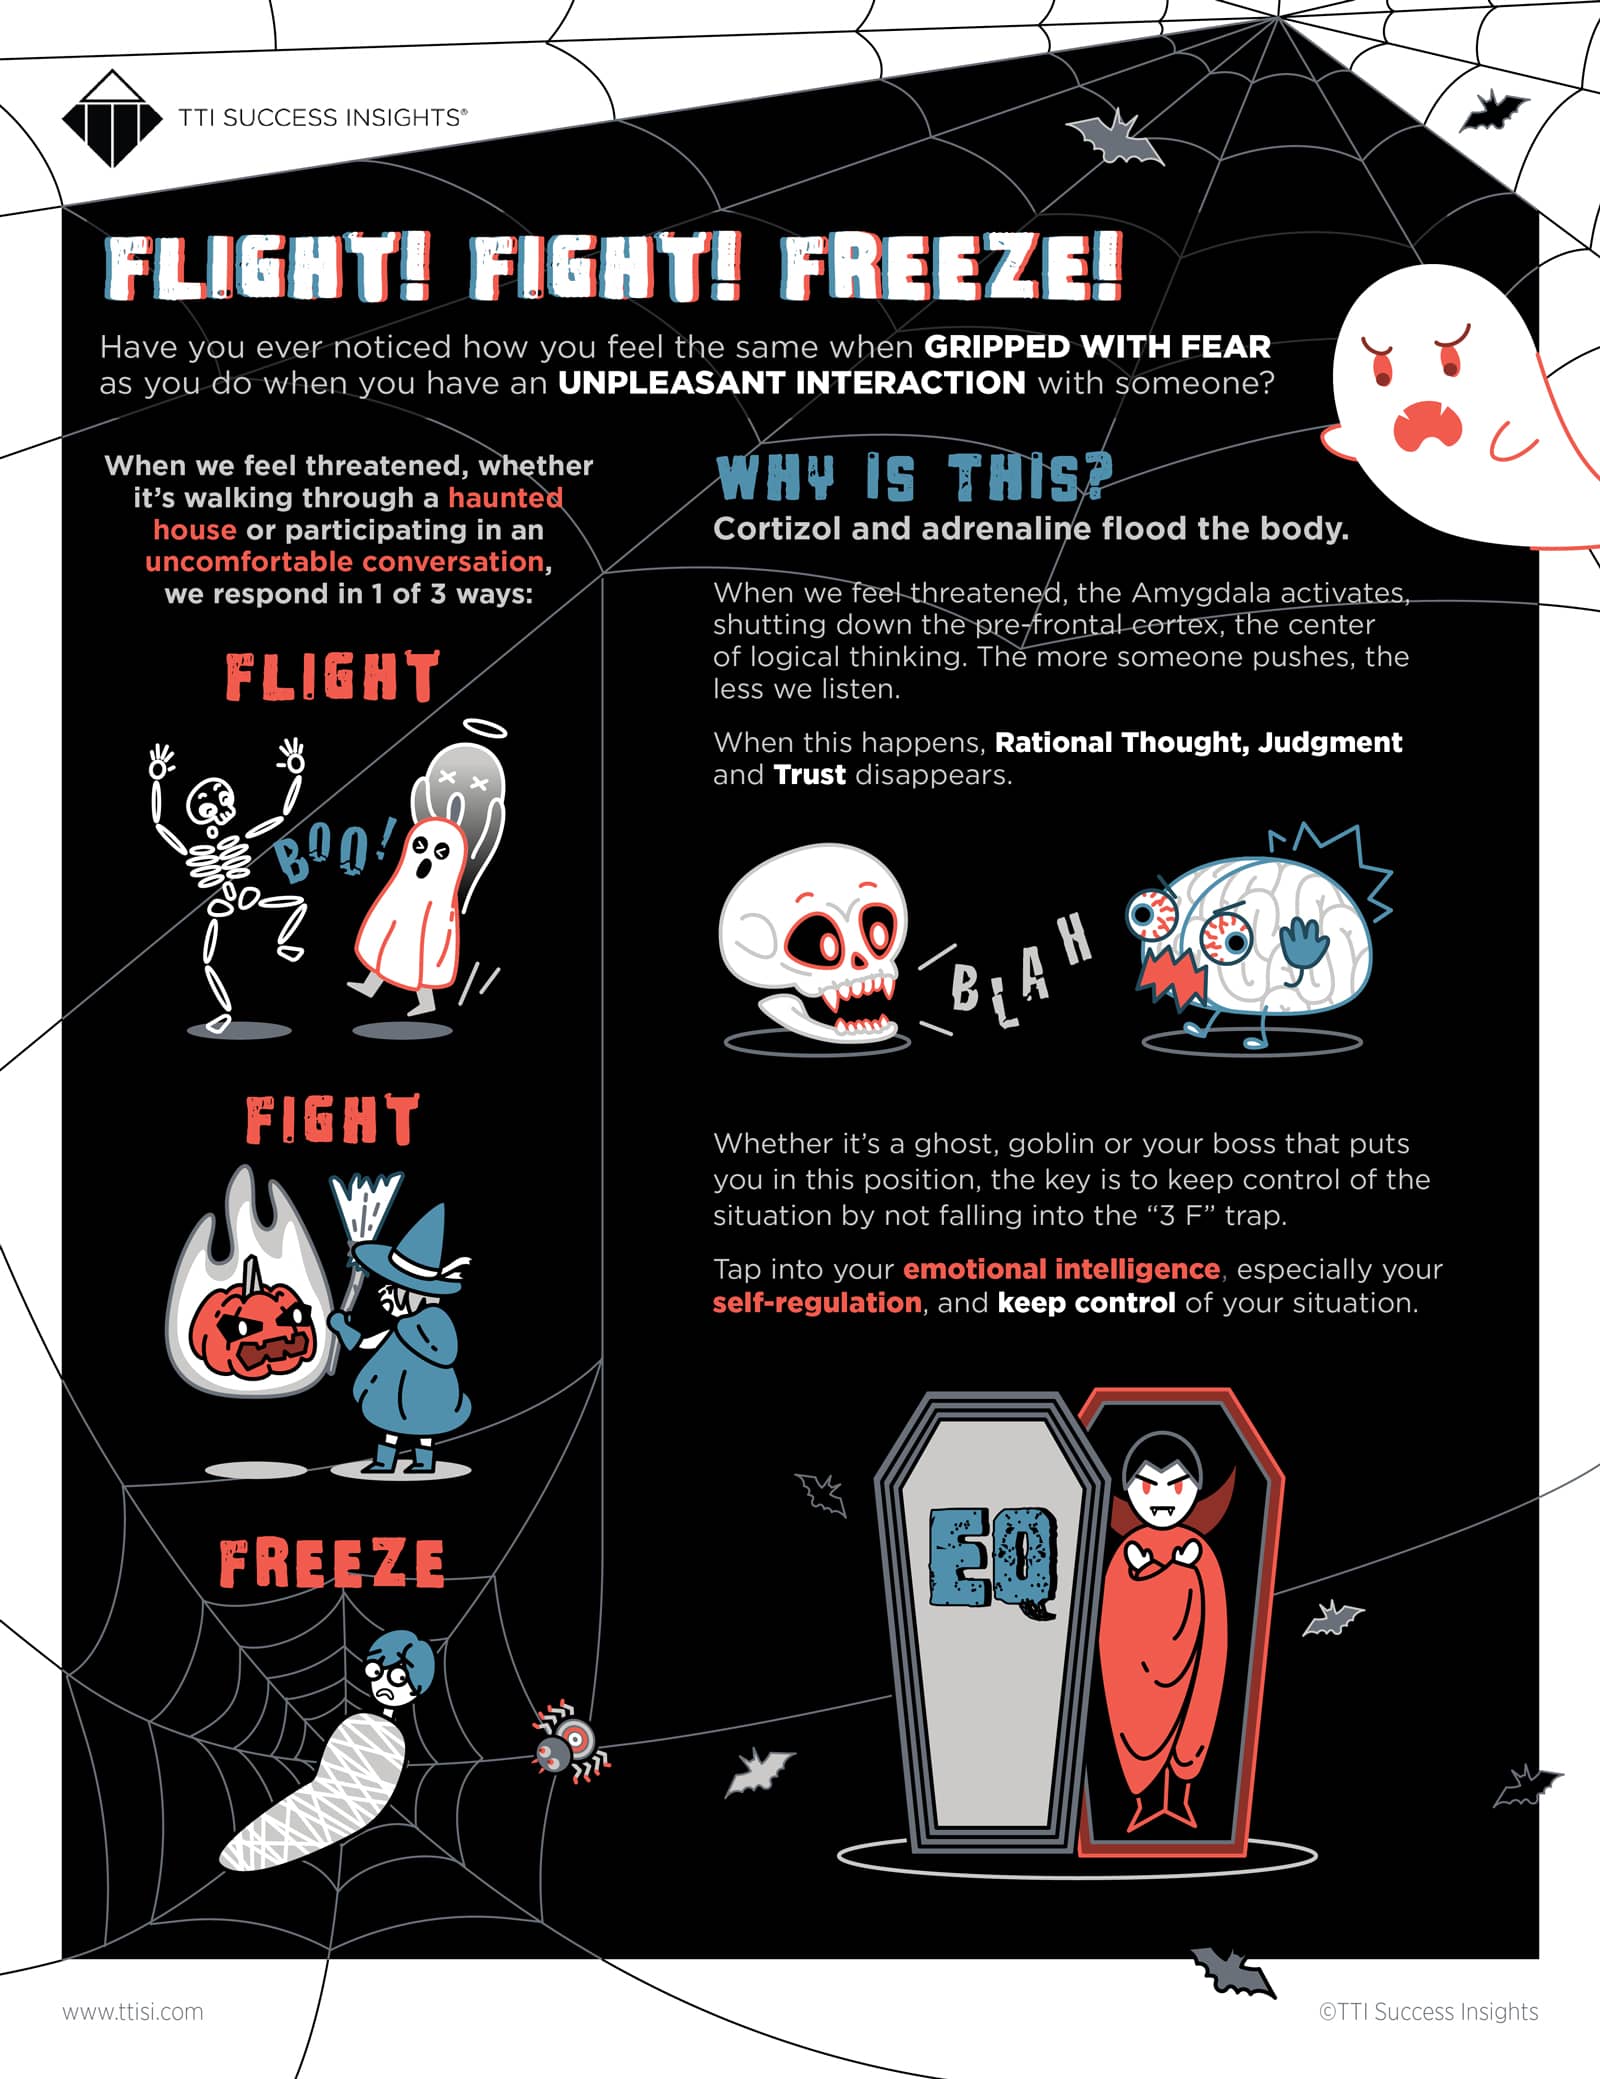 Fight, Flight or Freeze: How Do You React Under Pressure? - Infographic